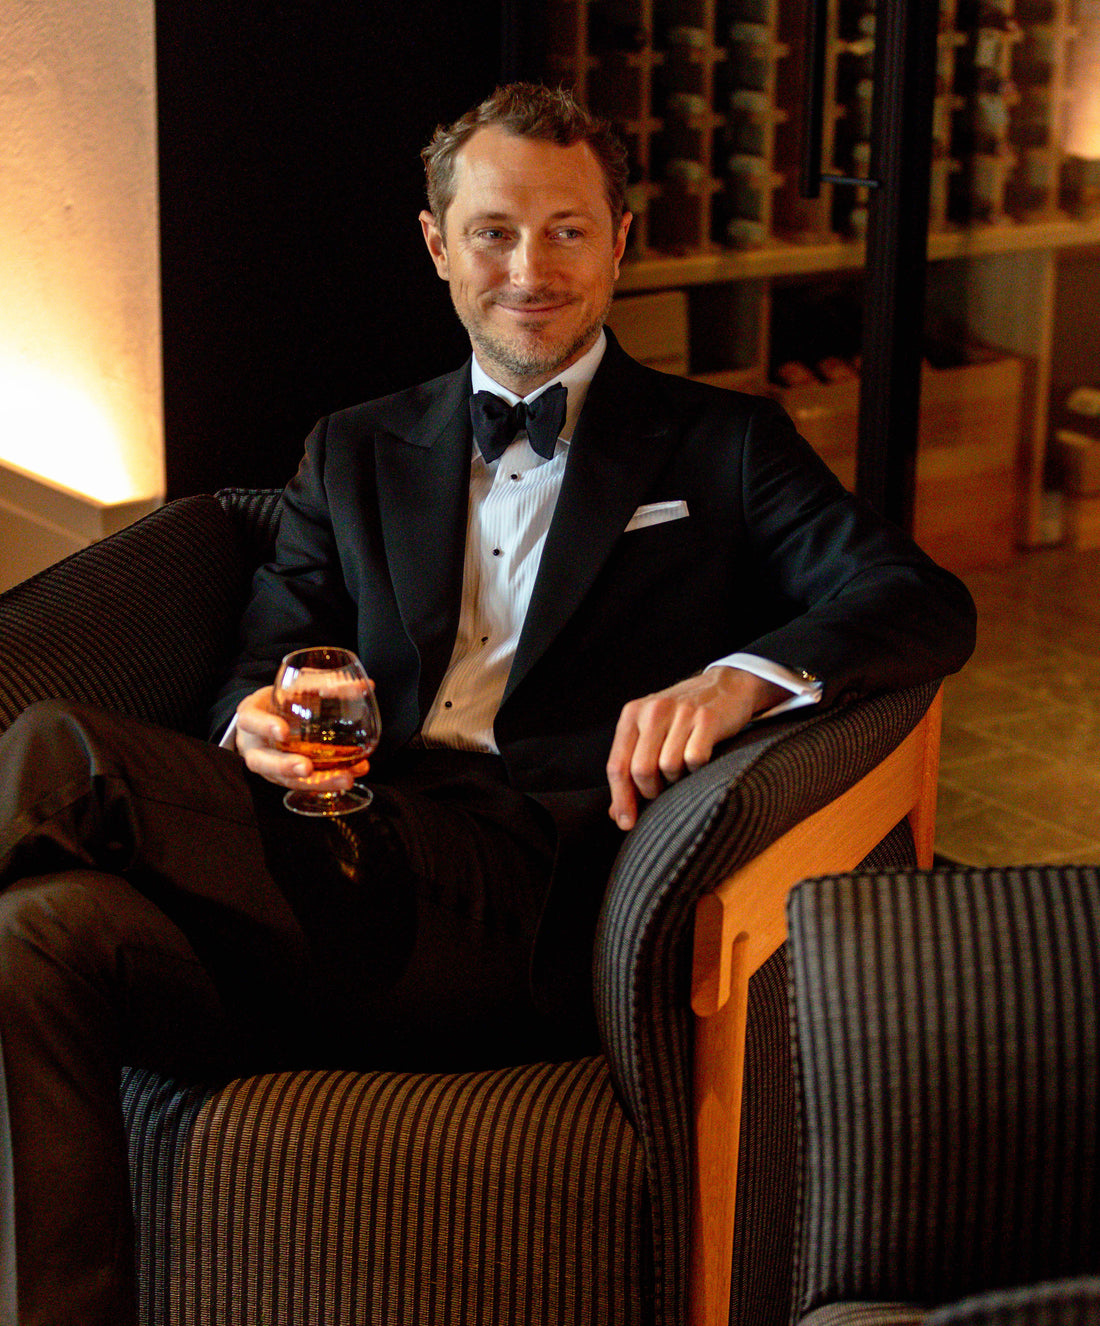 A man in a black tuxedo smiling, sitting in a dark chair with a glass of amber liquid, in a dimly lit room.